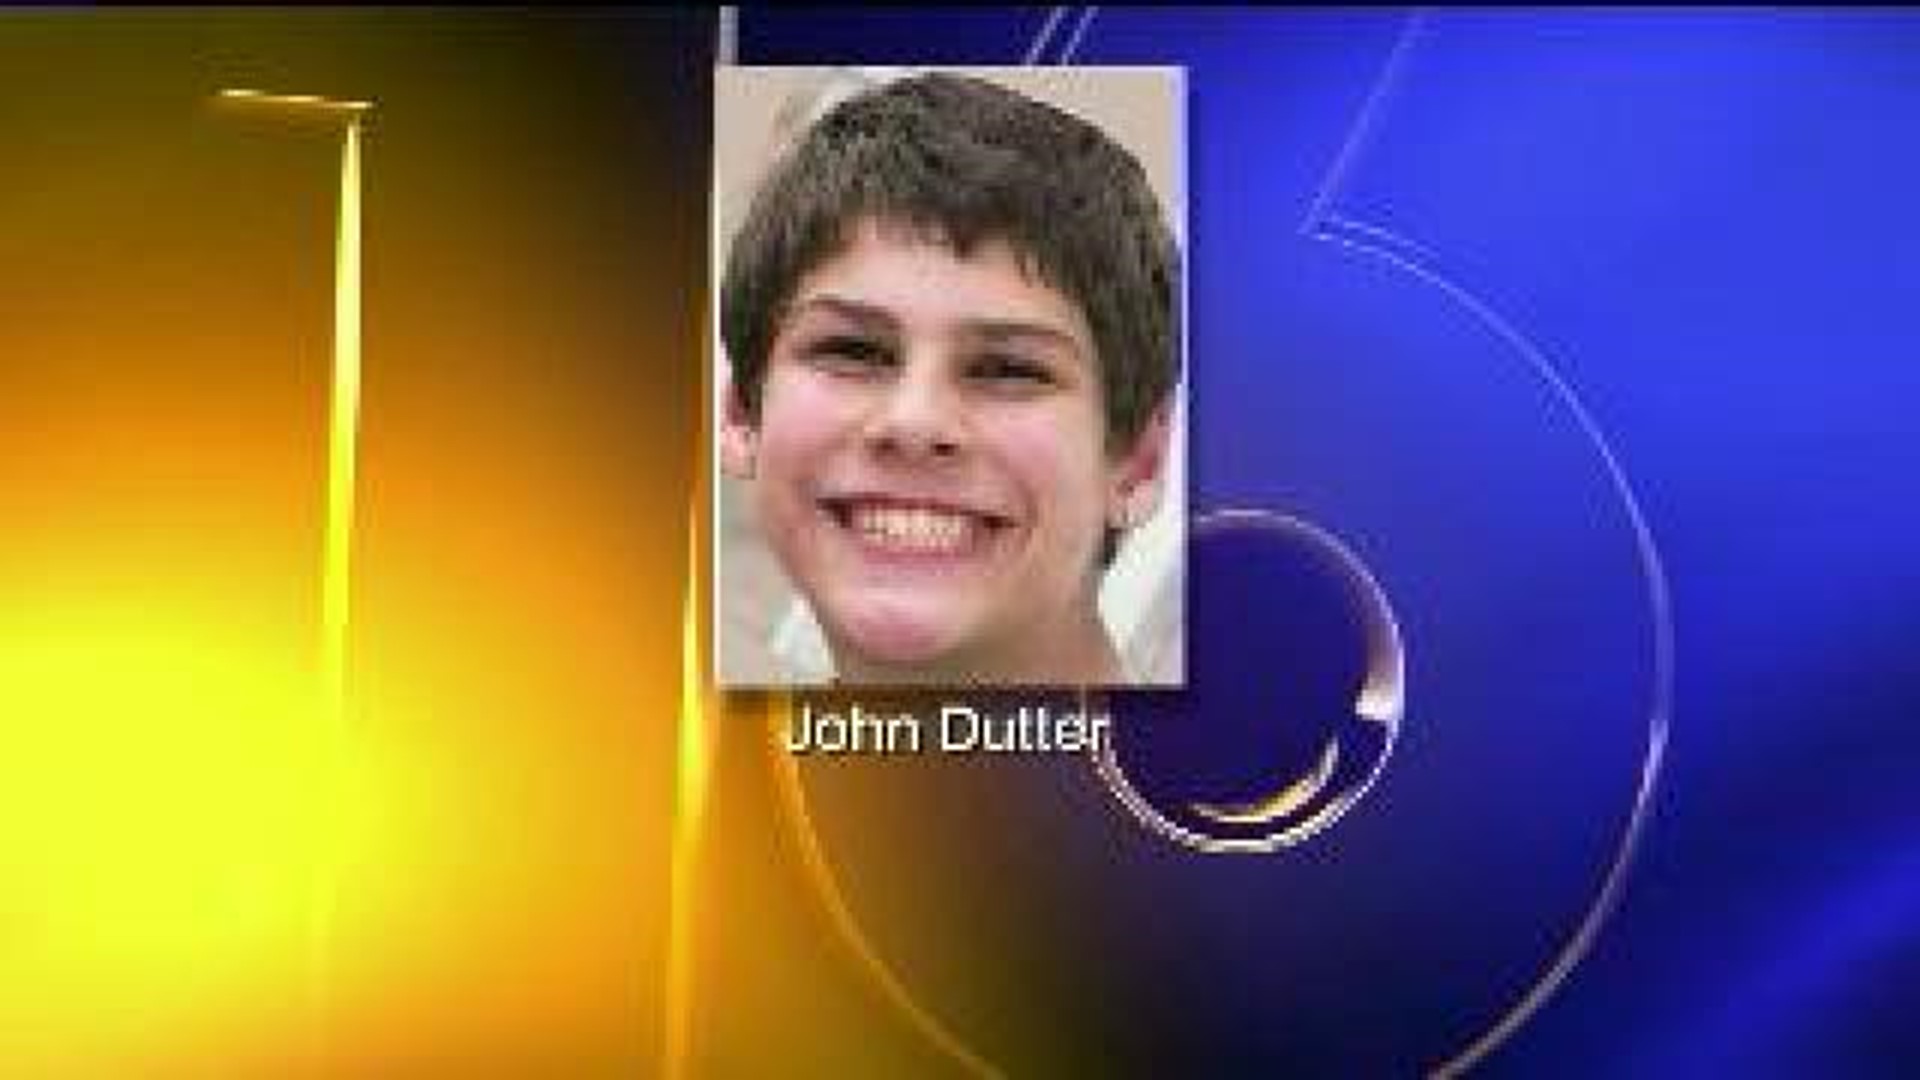 Friends Trying to Make Sense of Teen’s Death